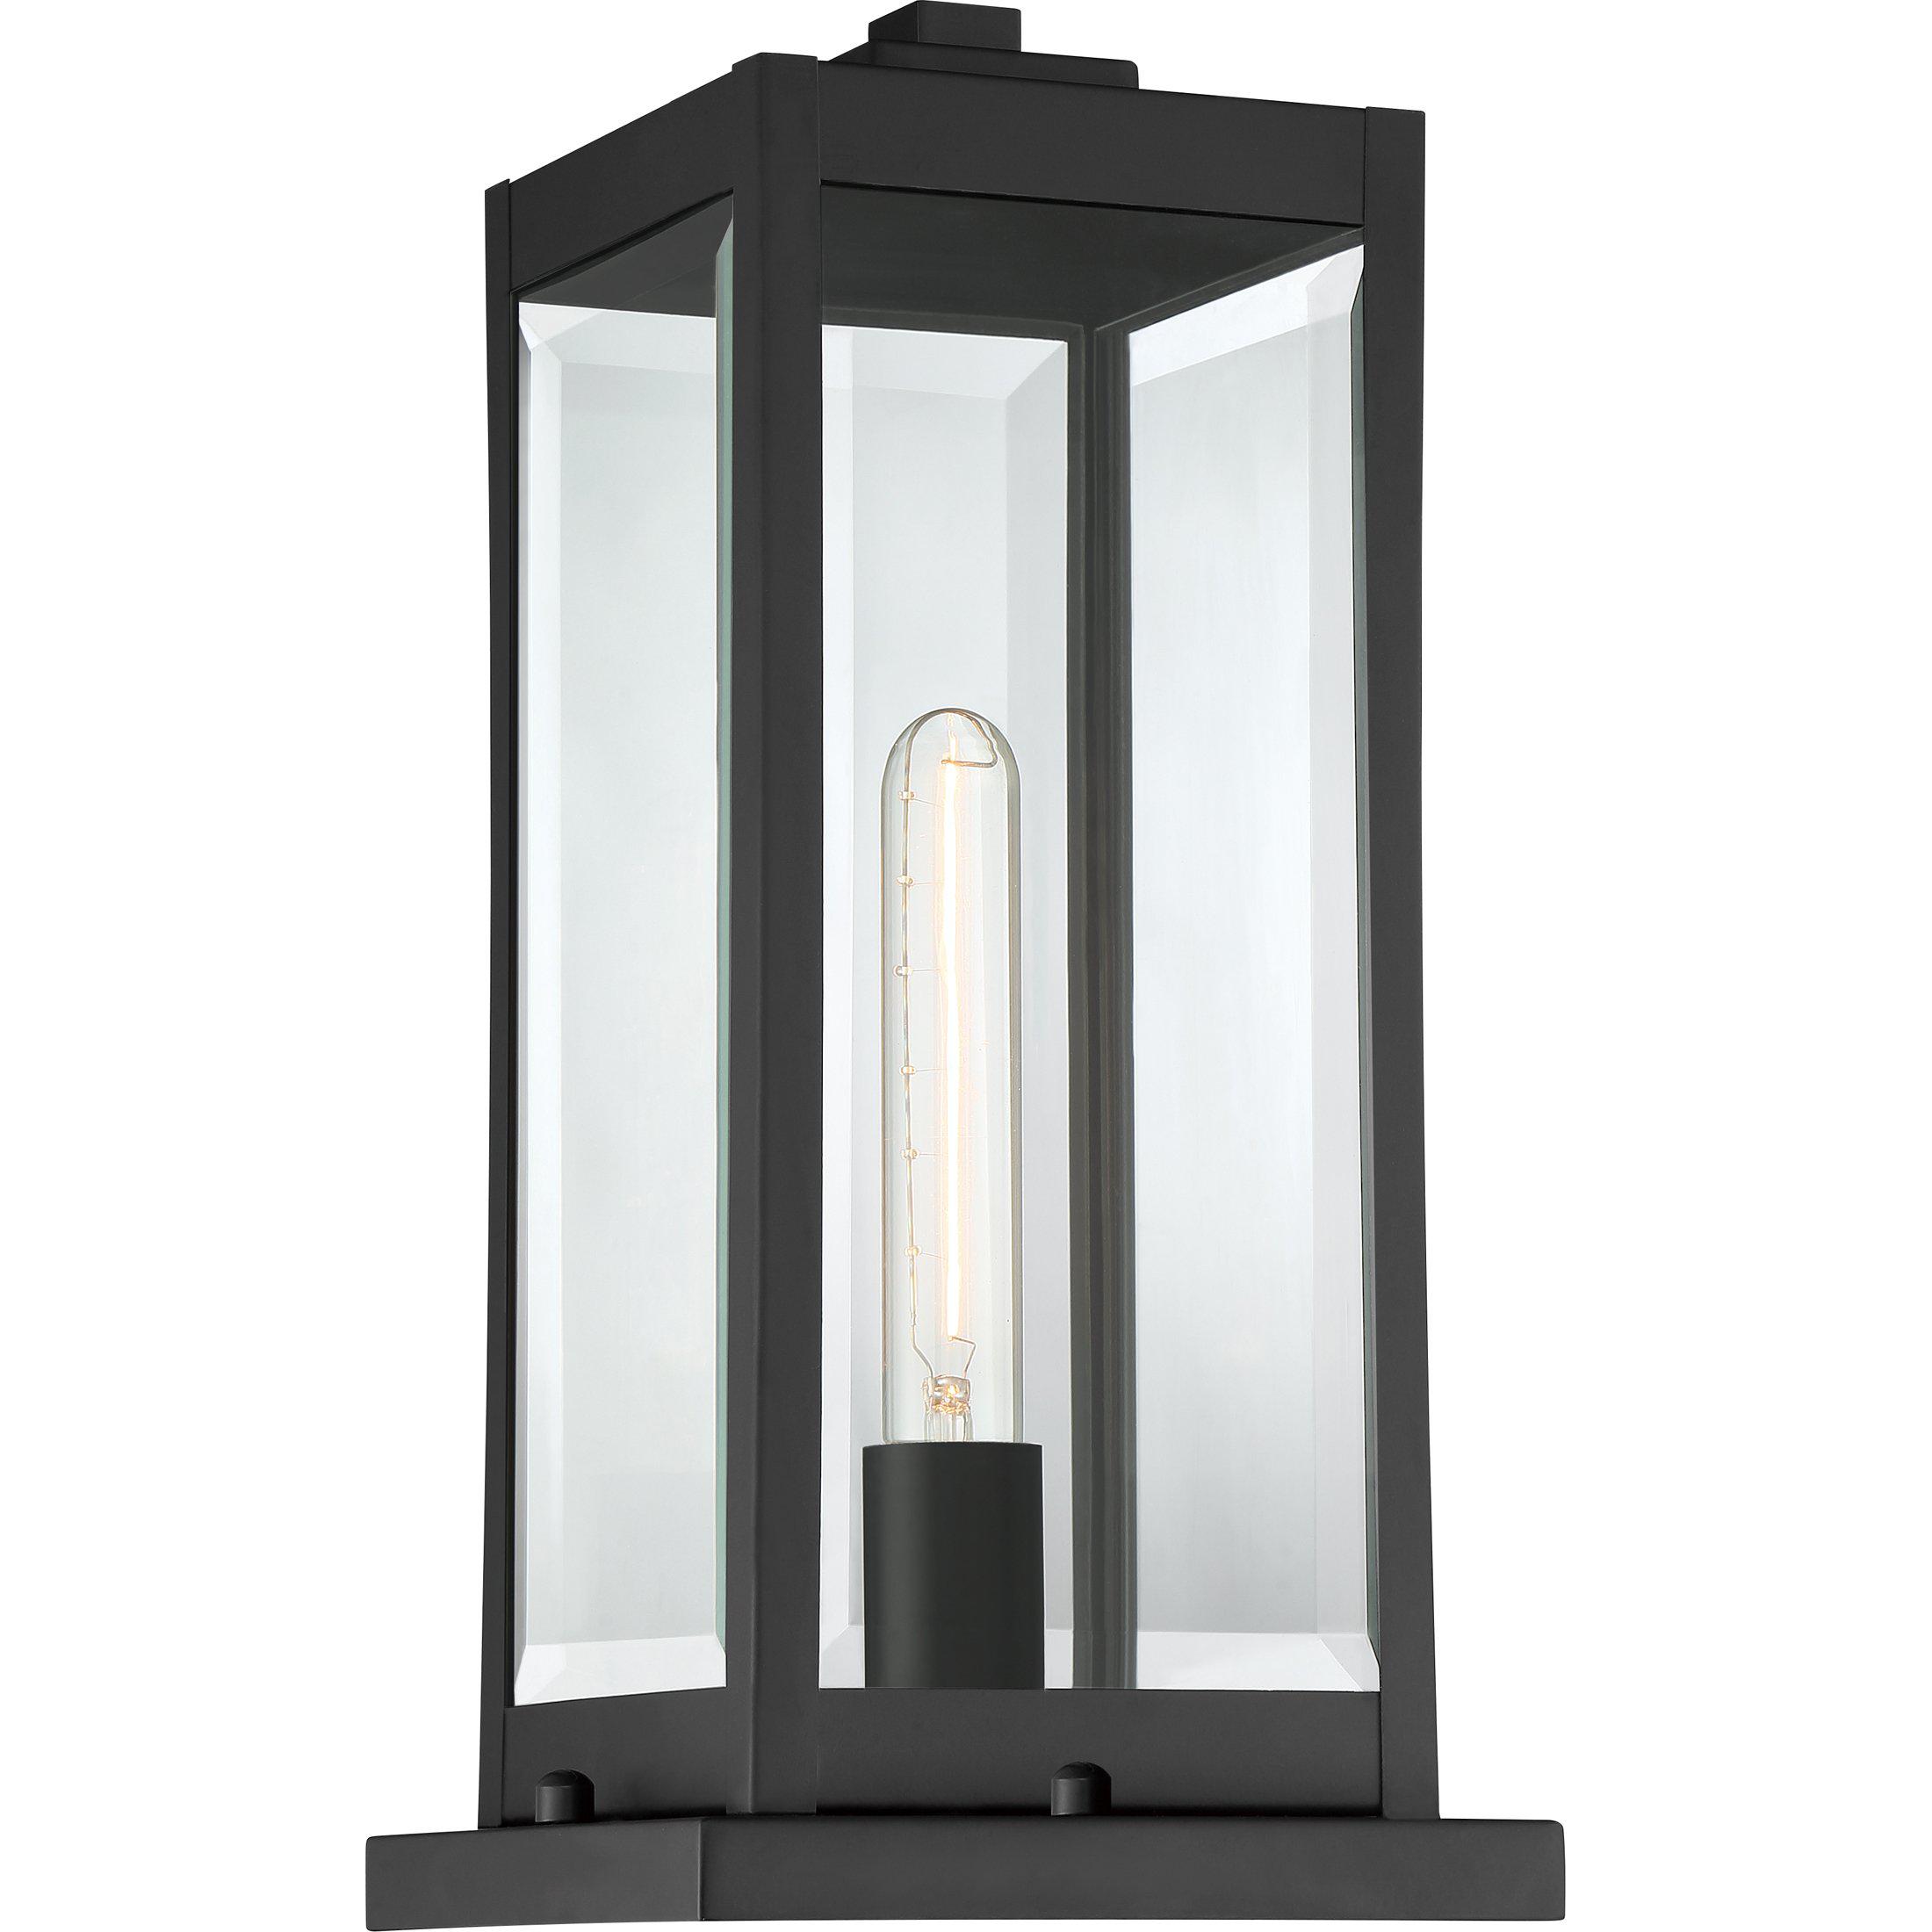 Quoizel  Westover Outdoor Lantern, Pier Outdoor l Wall Quoizel   